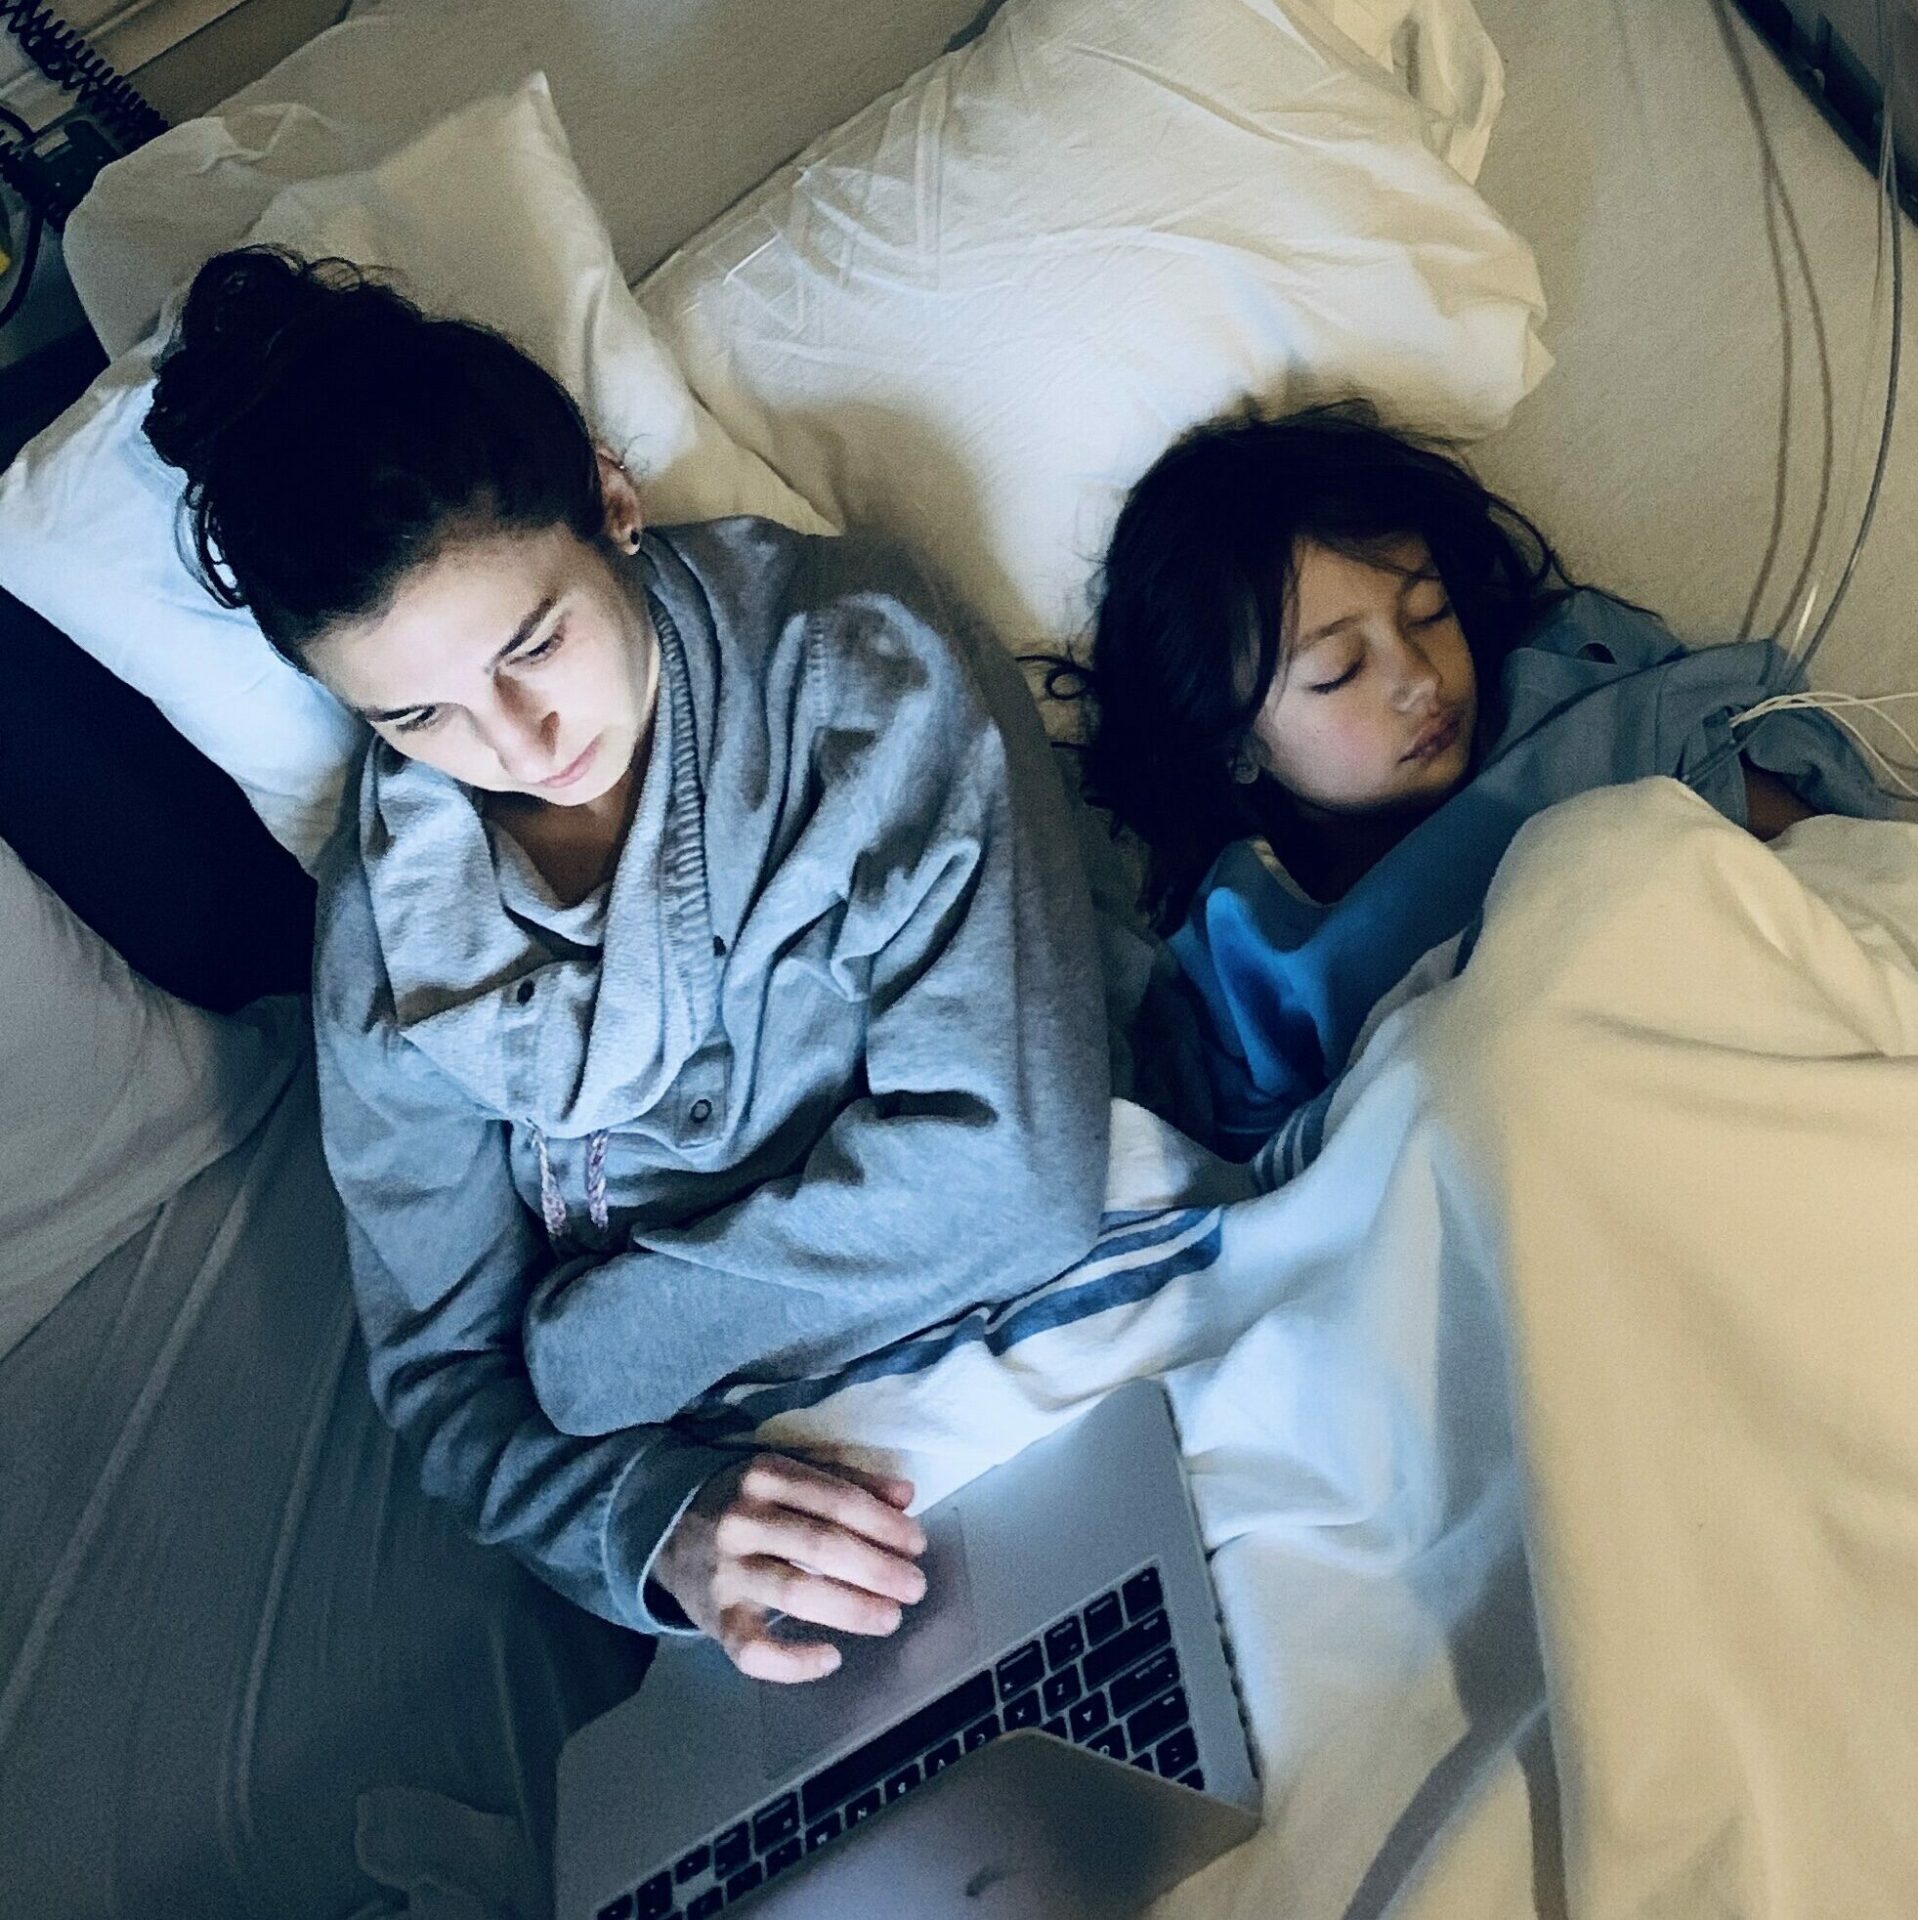 parent writing a blog post on a computer next to a sleeping PFIC patient in a hospital bed